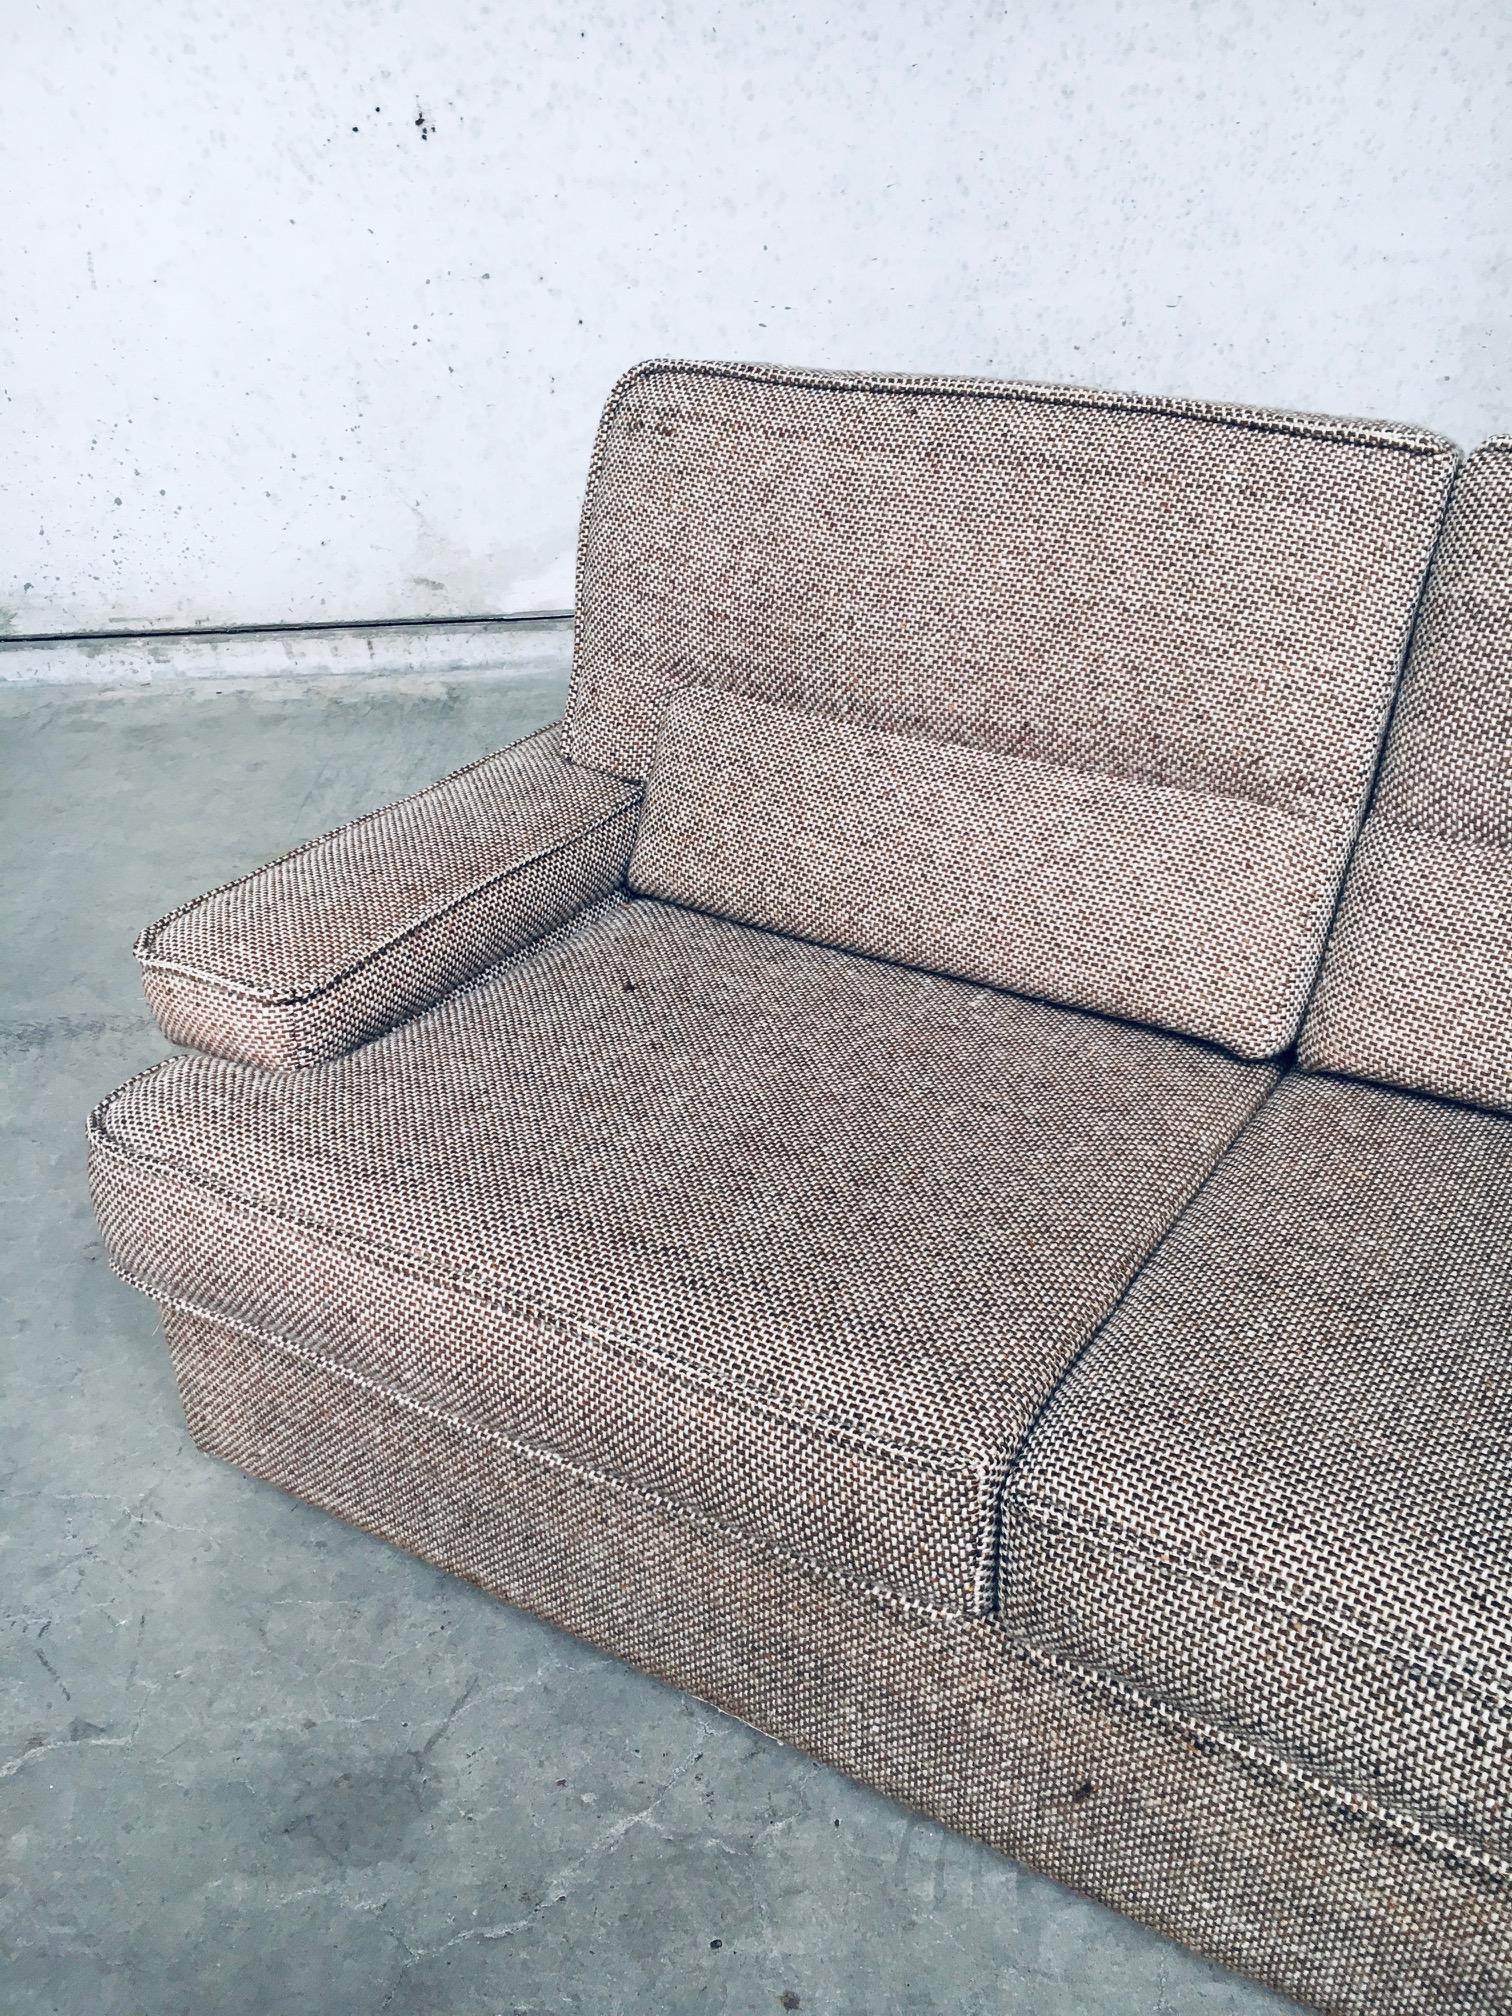 Midcentury Modern Design Boucle 3 Seat Sofa, Italy 1970's For Sale 4